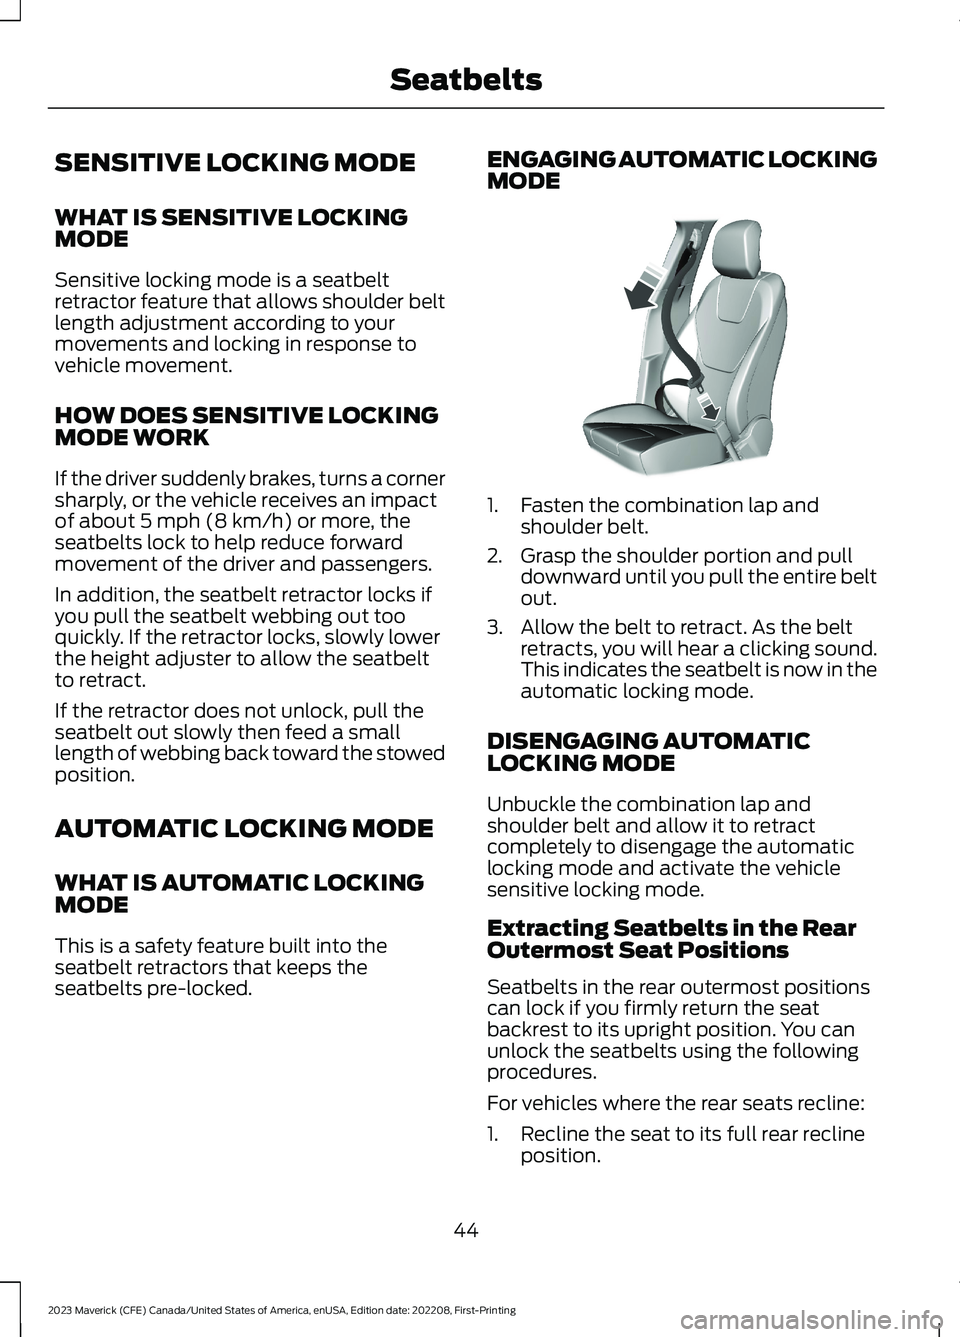 FORD MAVERICK 2023  Owners Manual SENSITIVE LOCKING MODE
WHAT IS SENSITIVE LOCKINGMODE
Sensitive locking mode is a seatbeltretractor feature that allows shoulder beltlength adjustment according to yourmovements and locking in response